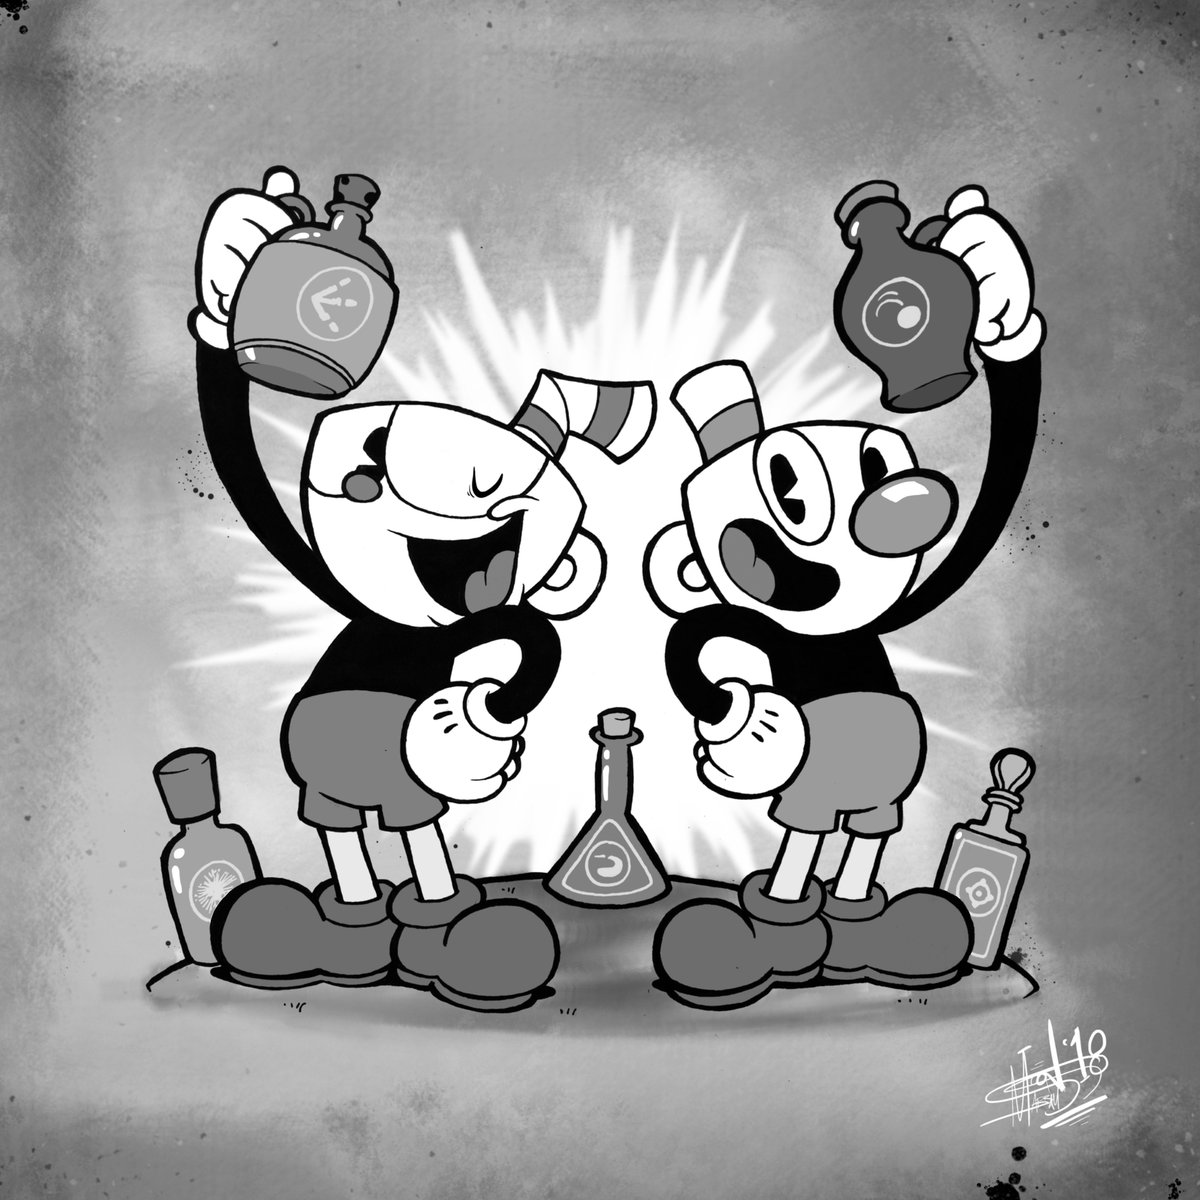 MabramS on Twitter: "Health, brother! #Cuphead… "